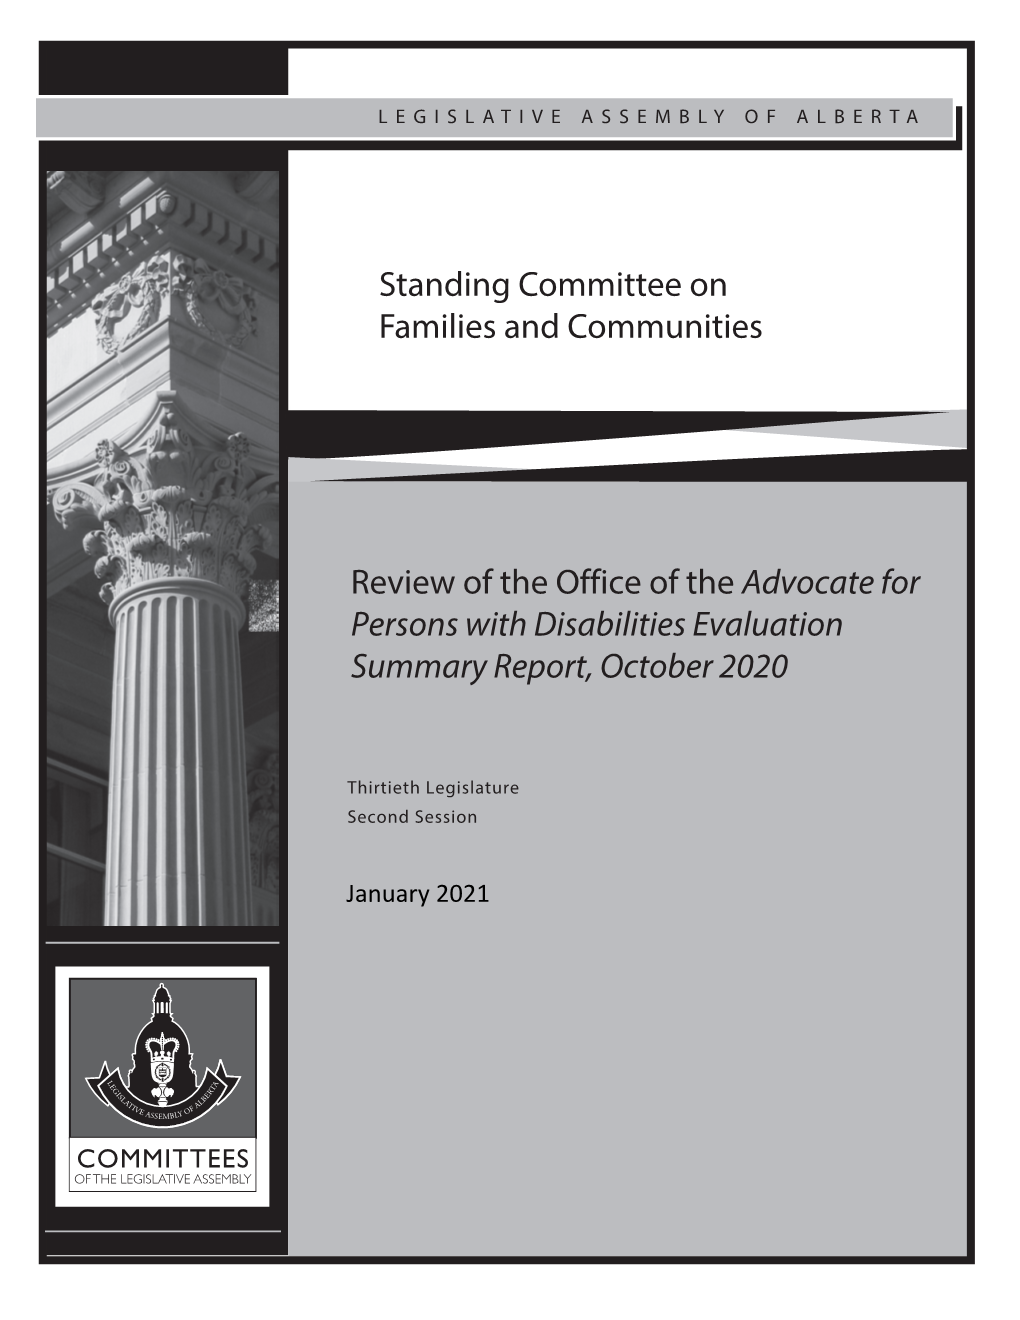 Review of the Office of the Advocate for Persons with Disabilities Evaluation Summary Report, October 2020